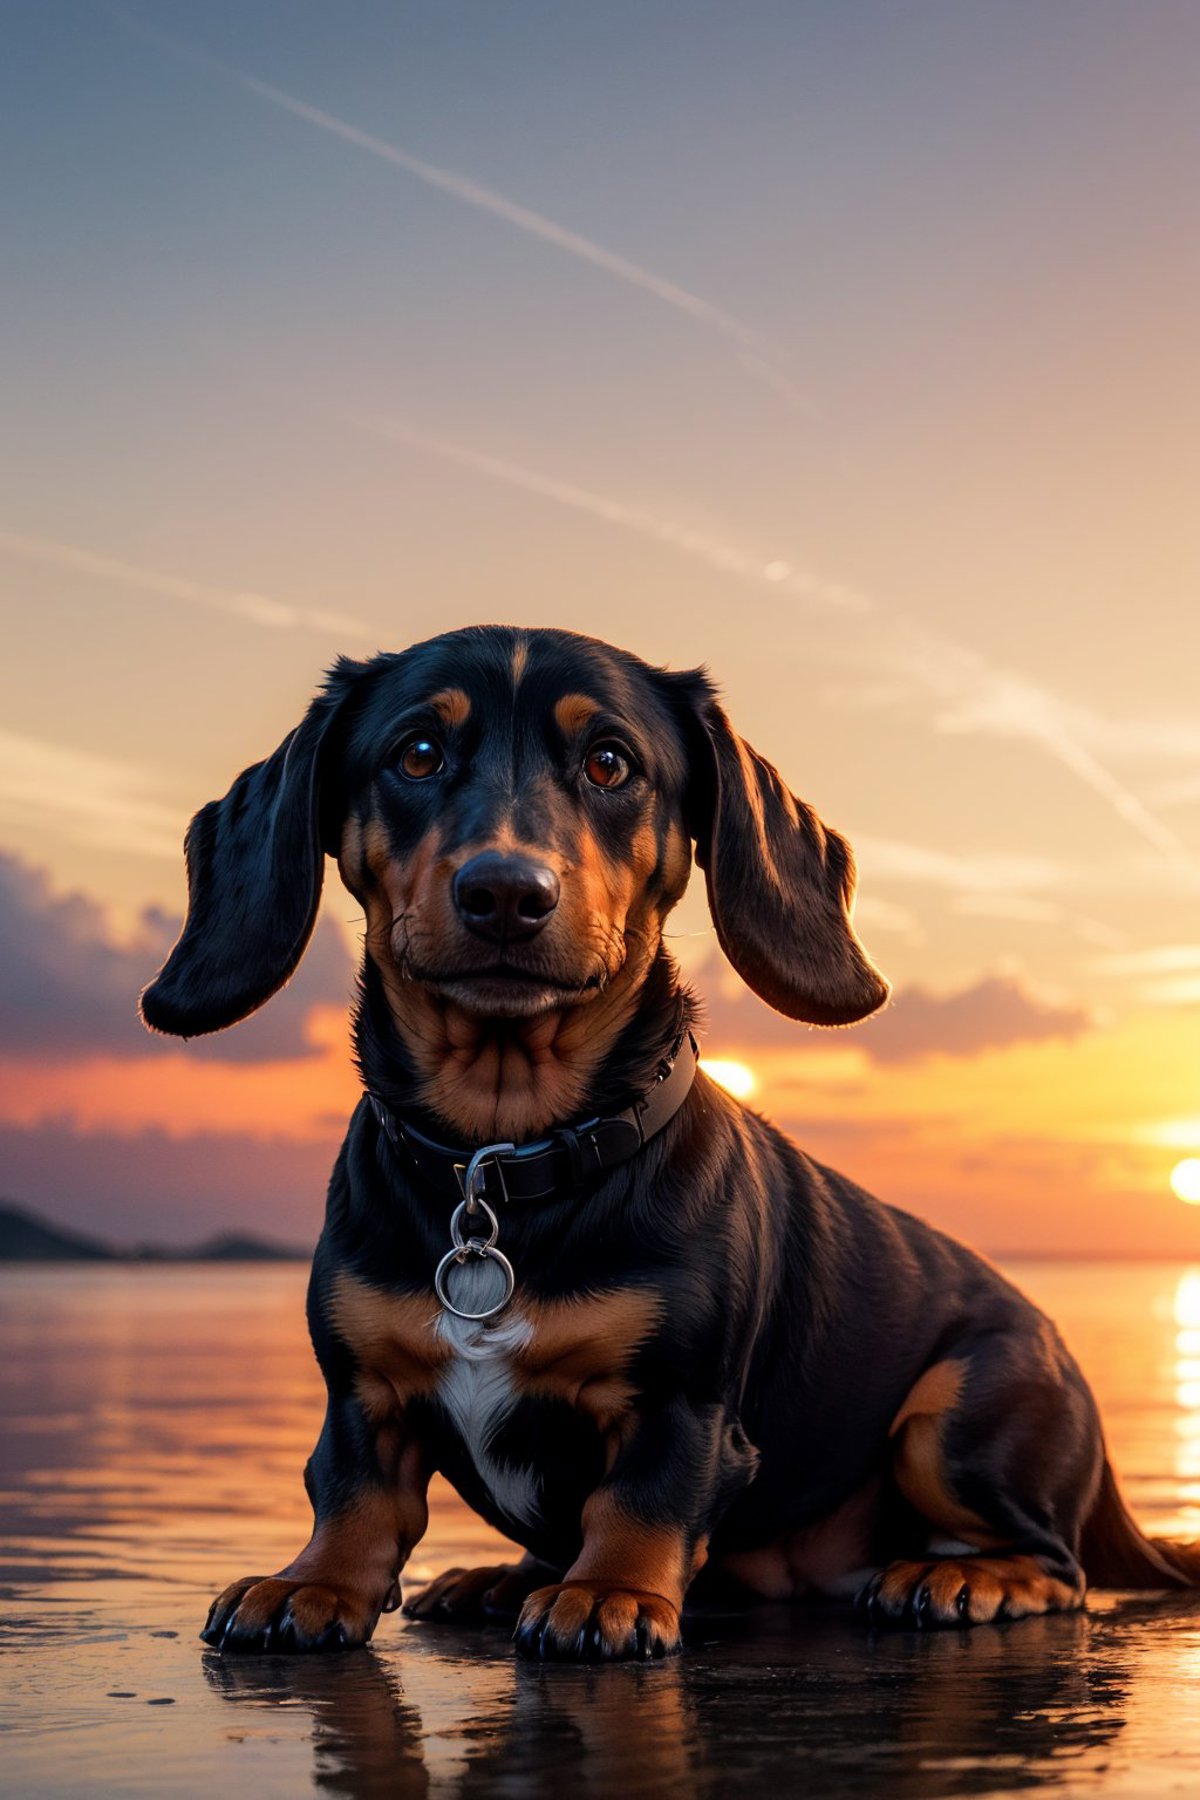 A cute black and brown dog with a collar and tag, looking at the sunset.